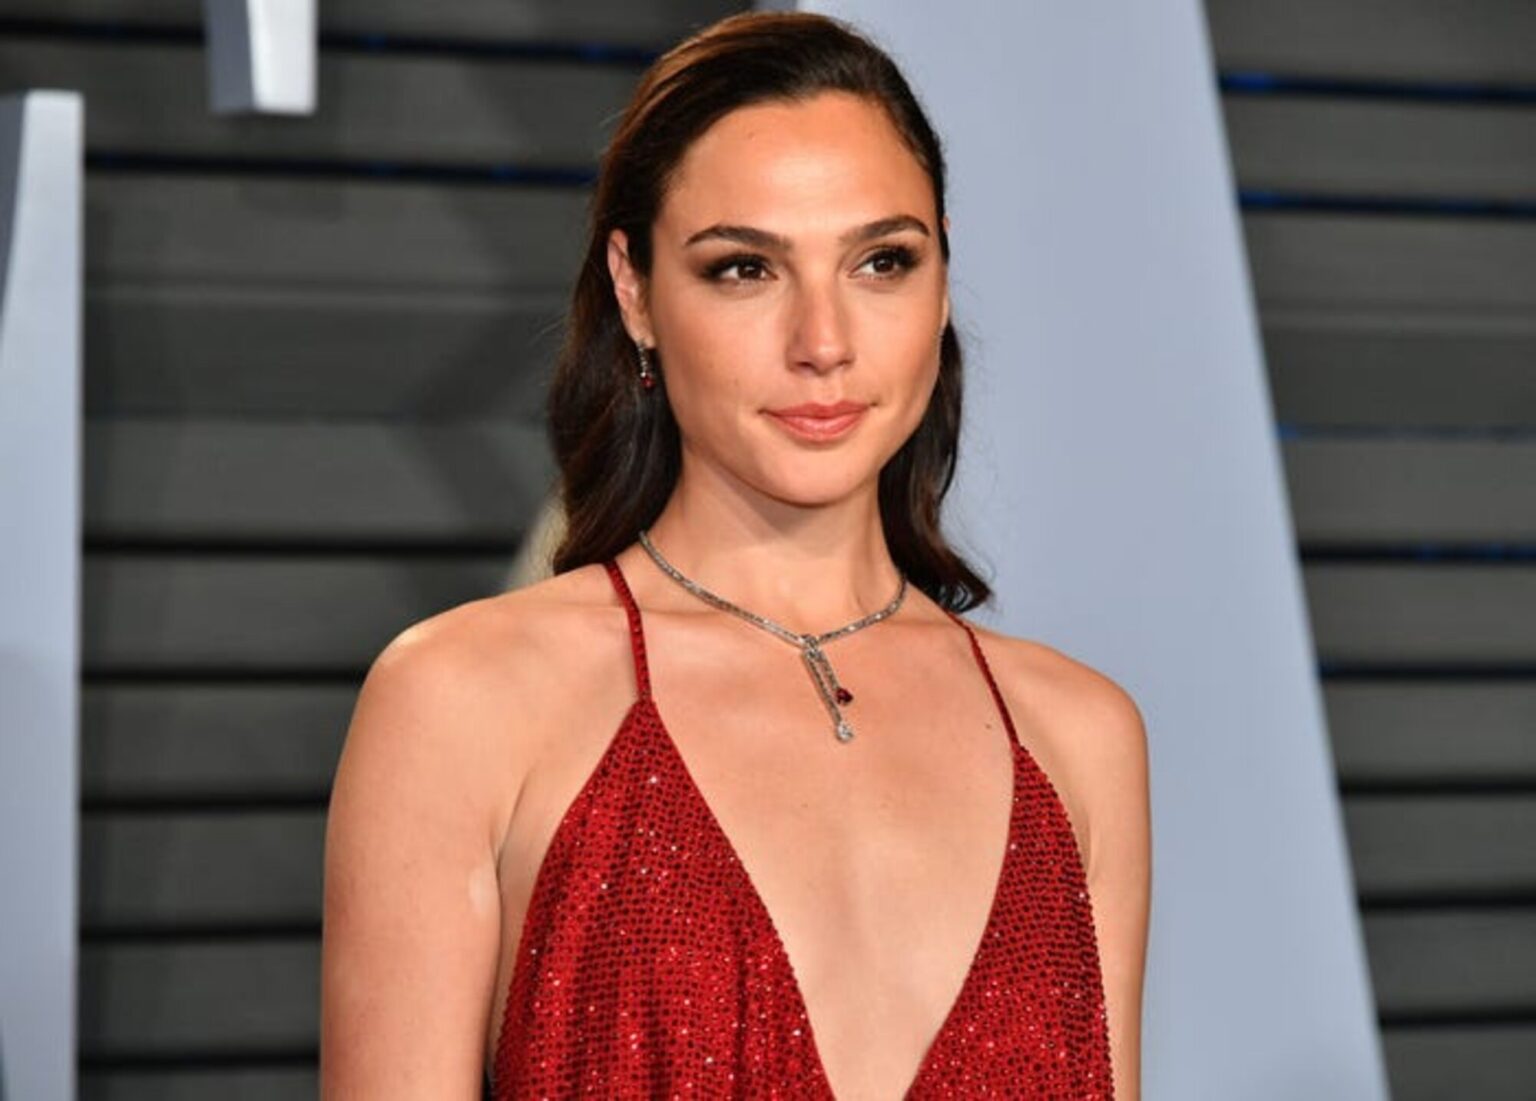 'Wonder Woman' star Gal Gadot is now being cancelled on Twitter after making a public statement. Check out why she is receiving backlash here.